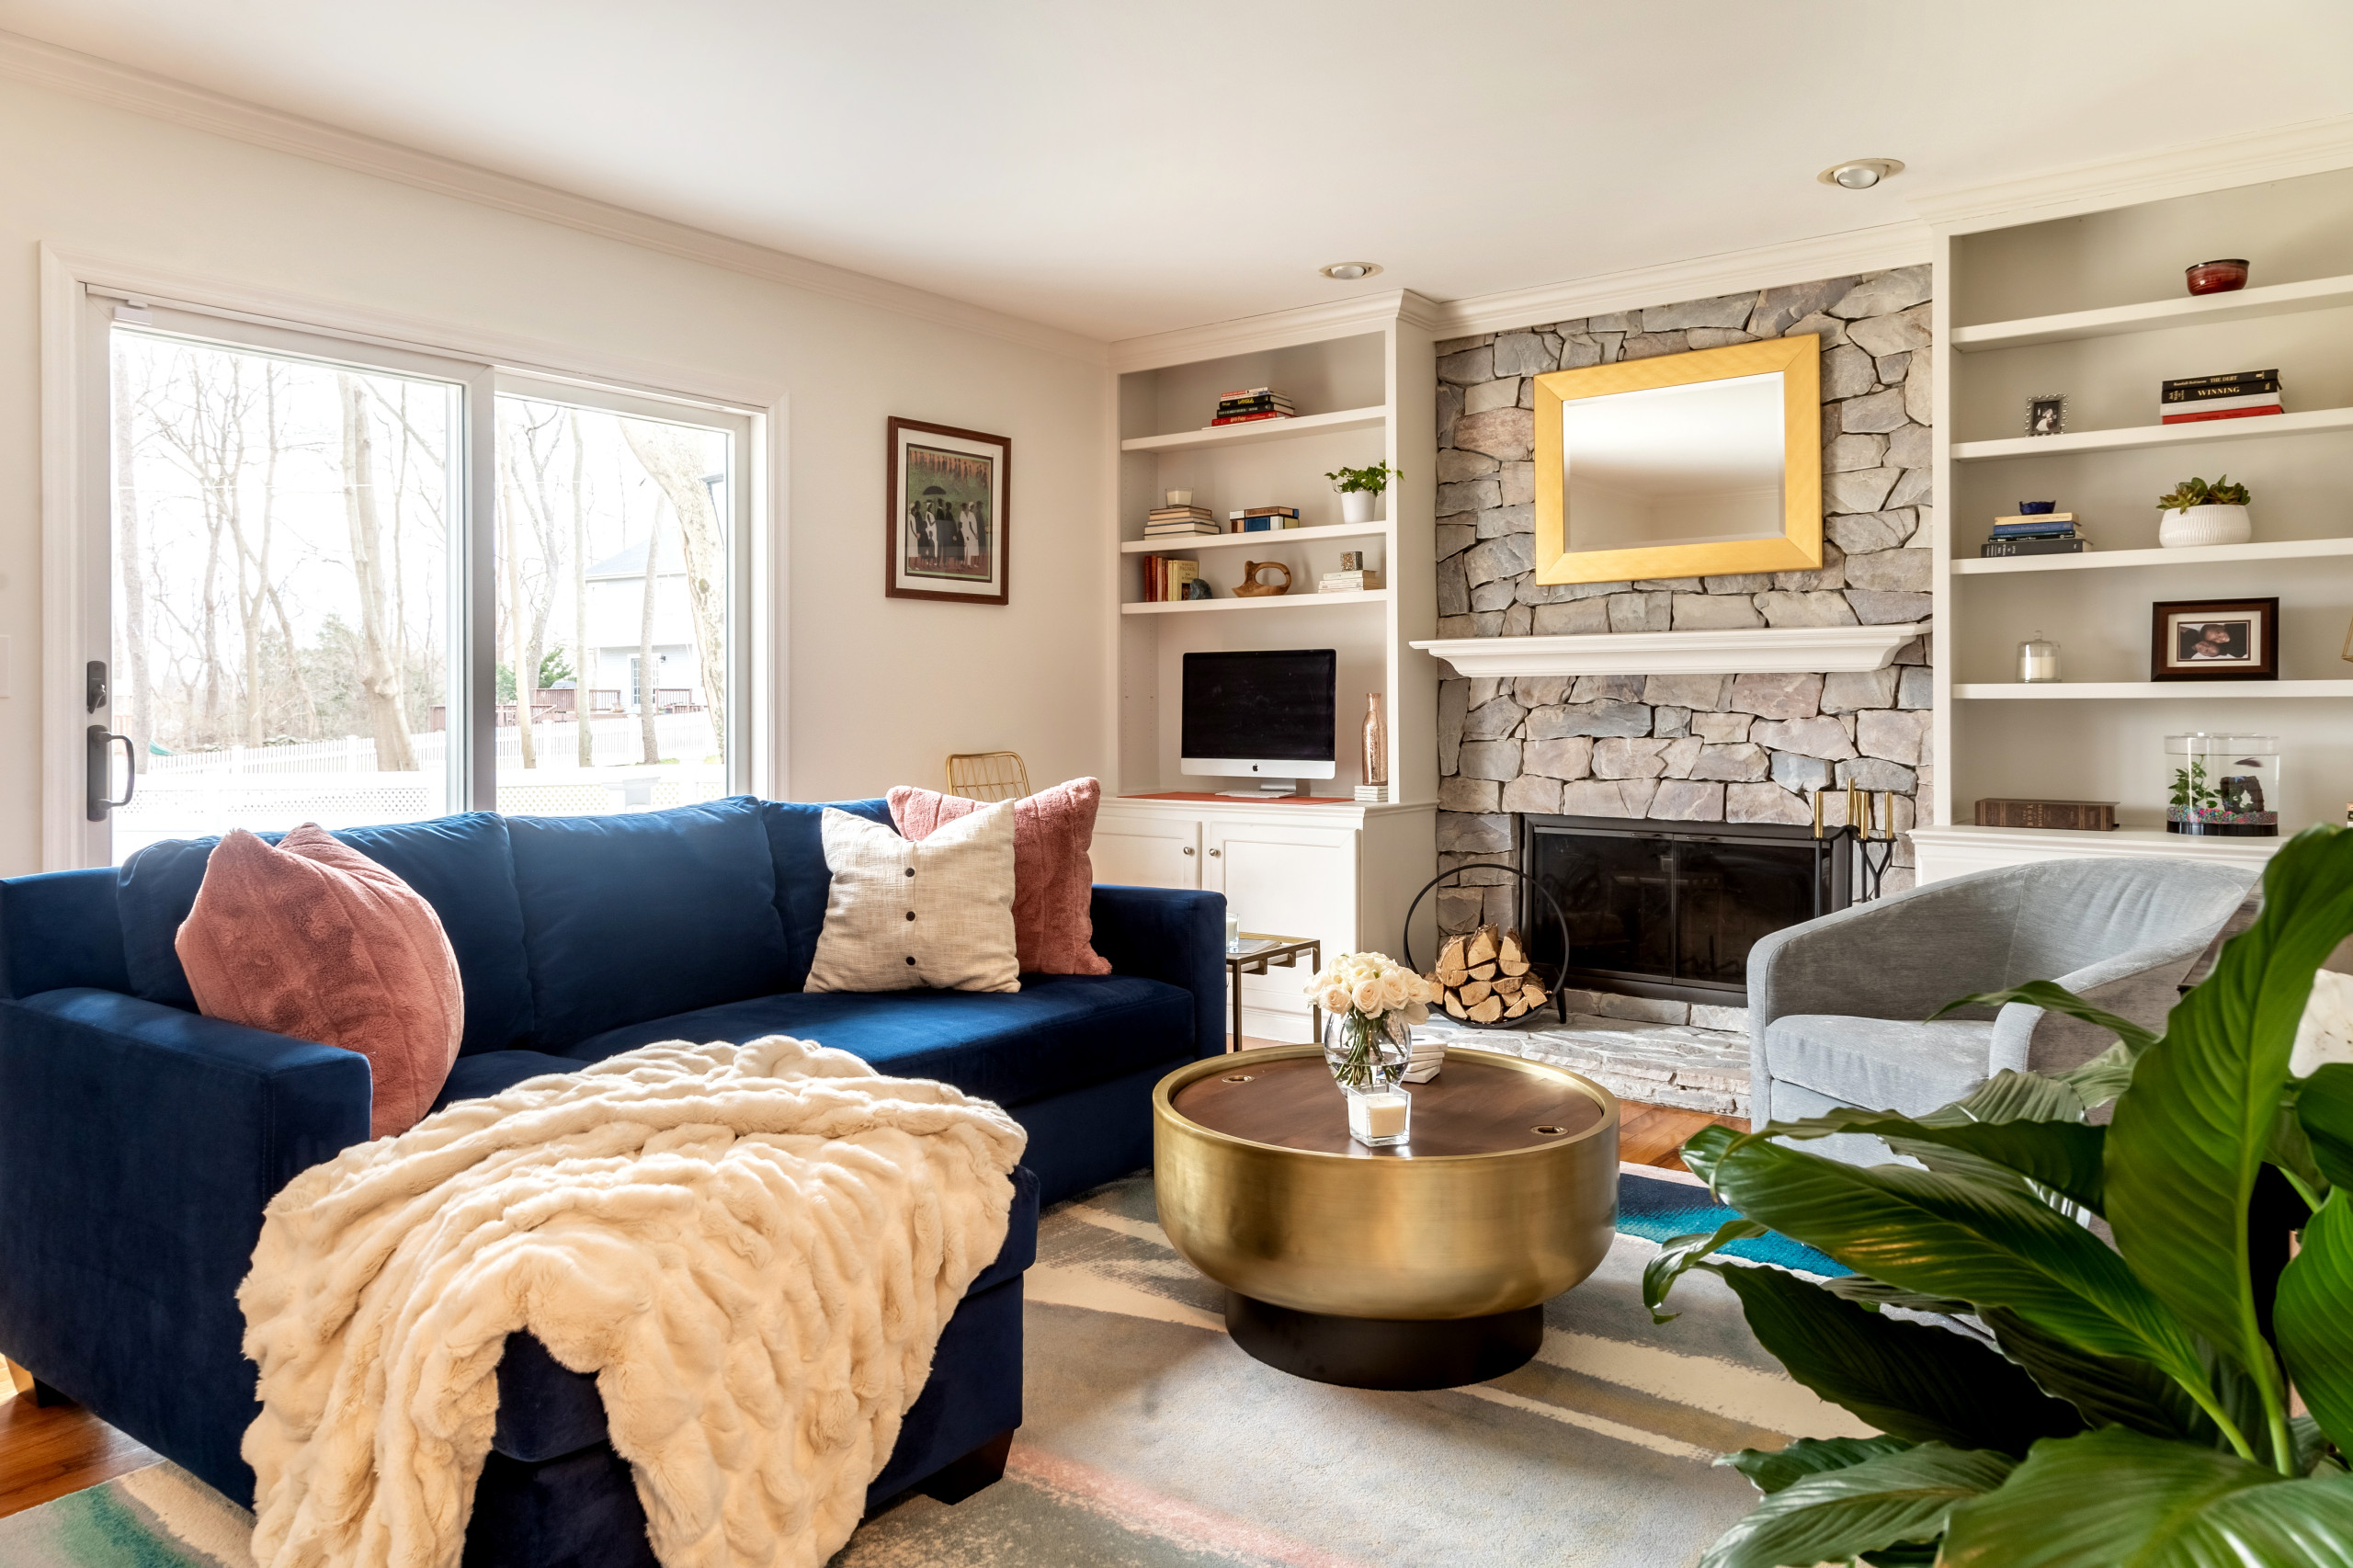 75 Beautiful Family Room Pictures Ideas February 2021 Houzz